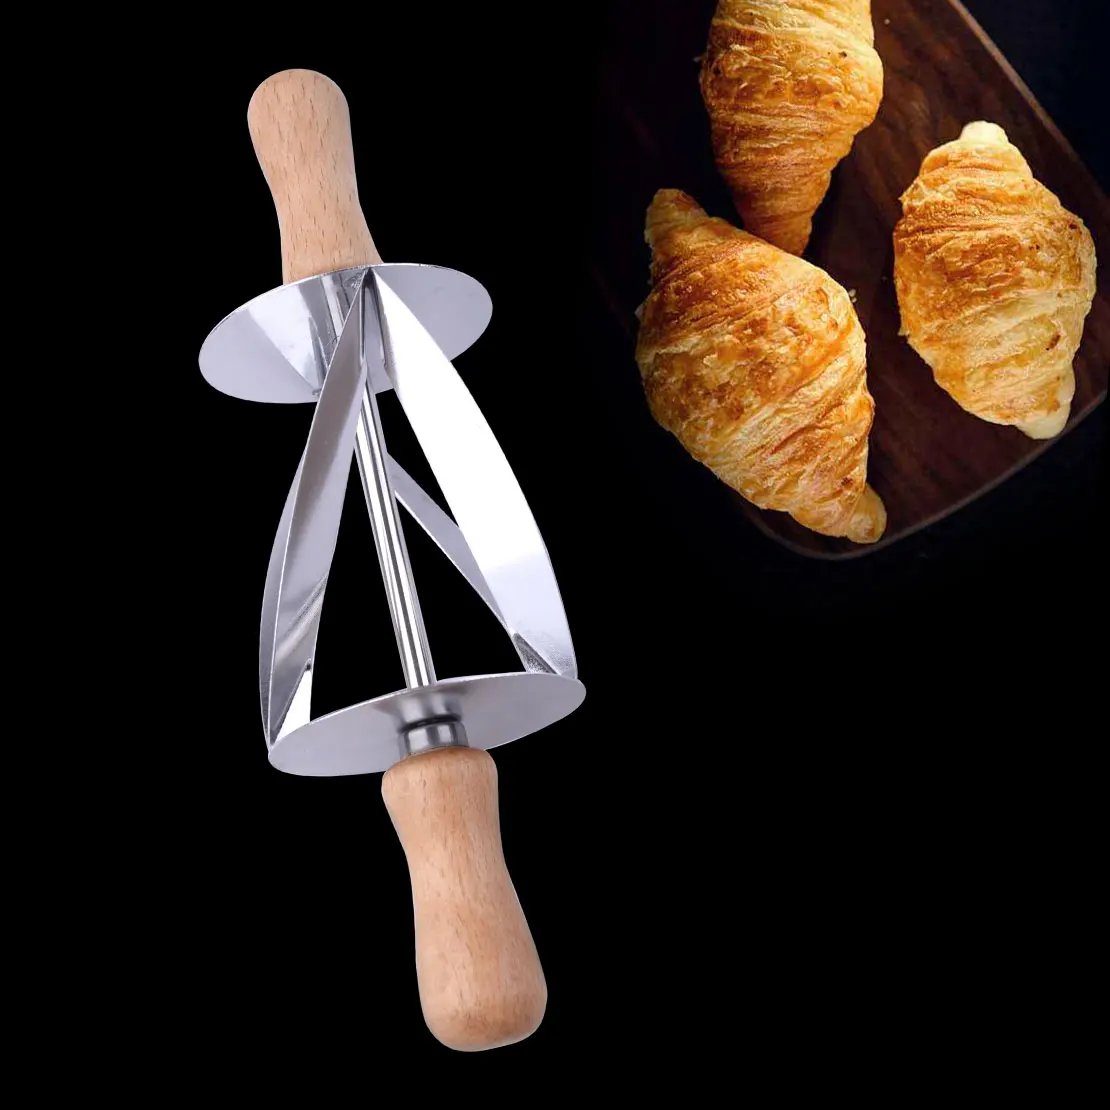 

LETAOSK Croissant Rolling Pin Pastry Dough Roller Cutter Bread Slicer Baking DIY Tool Accessories